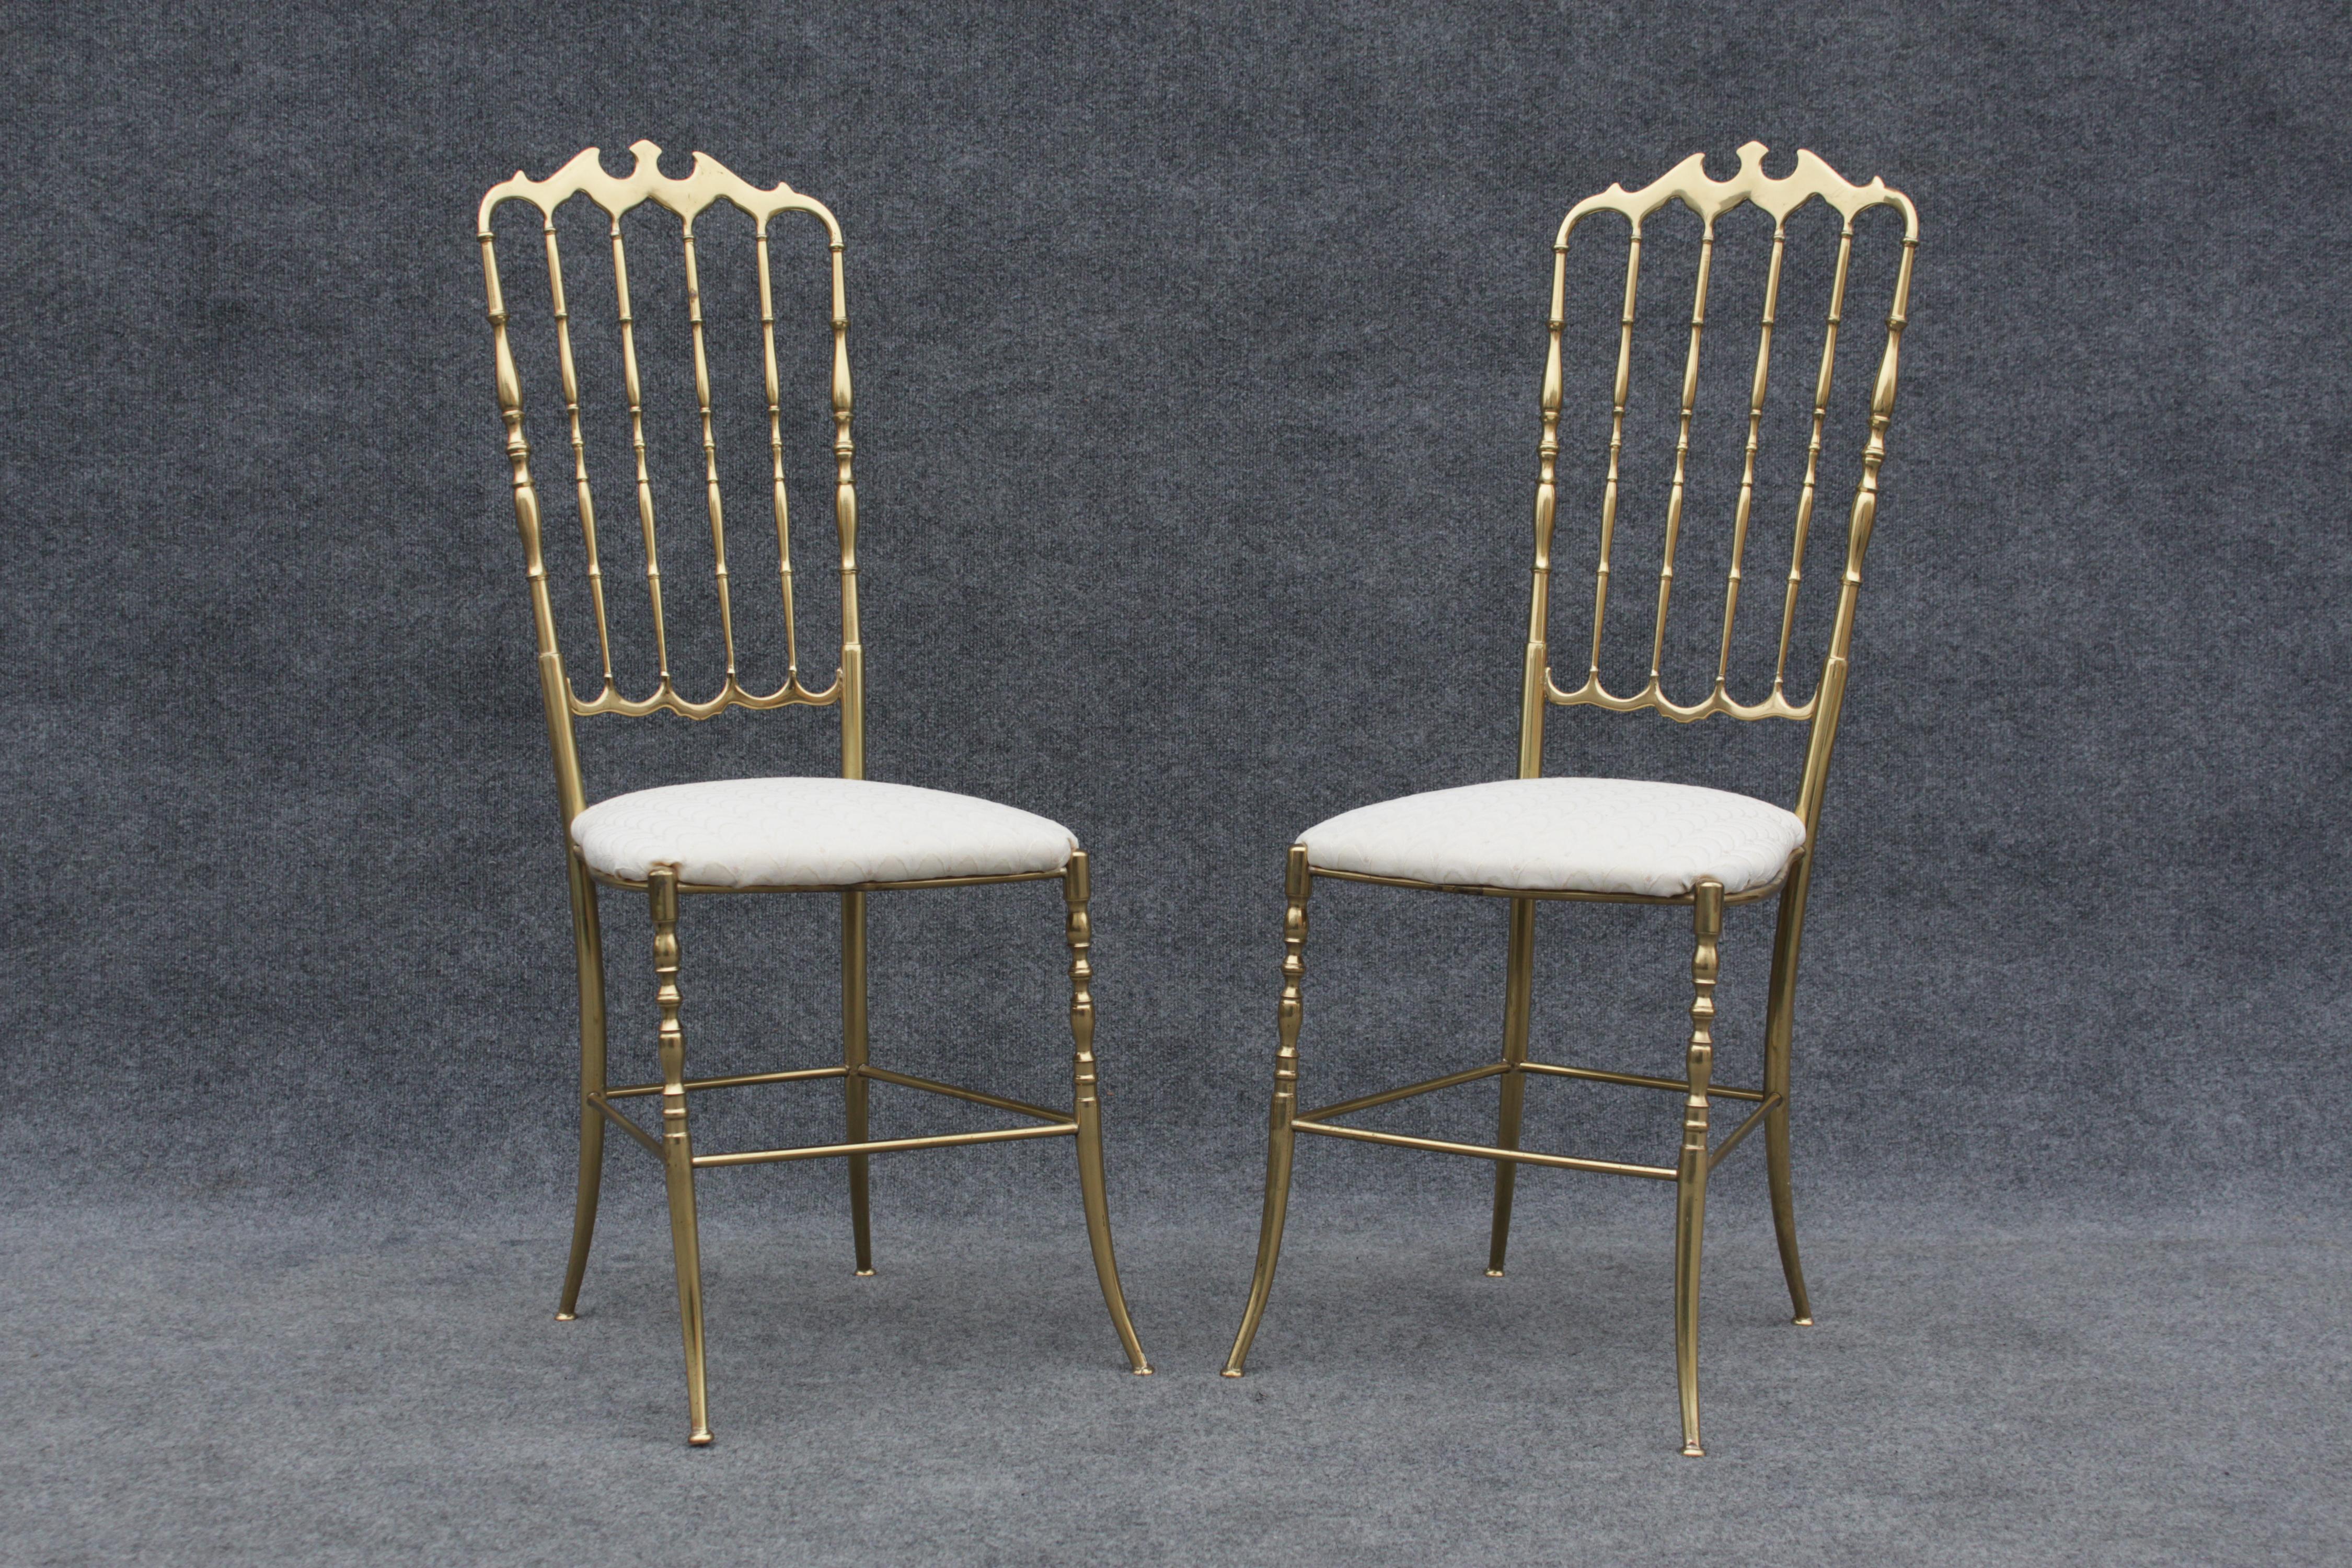 Pair of Solid Brass & White Upholstered Dining or Side Chairs by Chiavari Italy For Sale 3